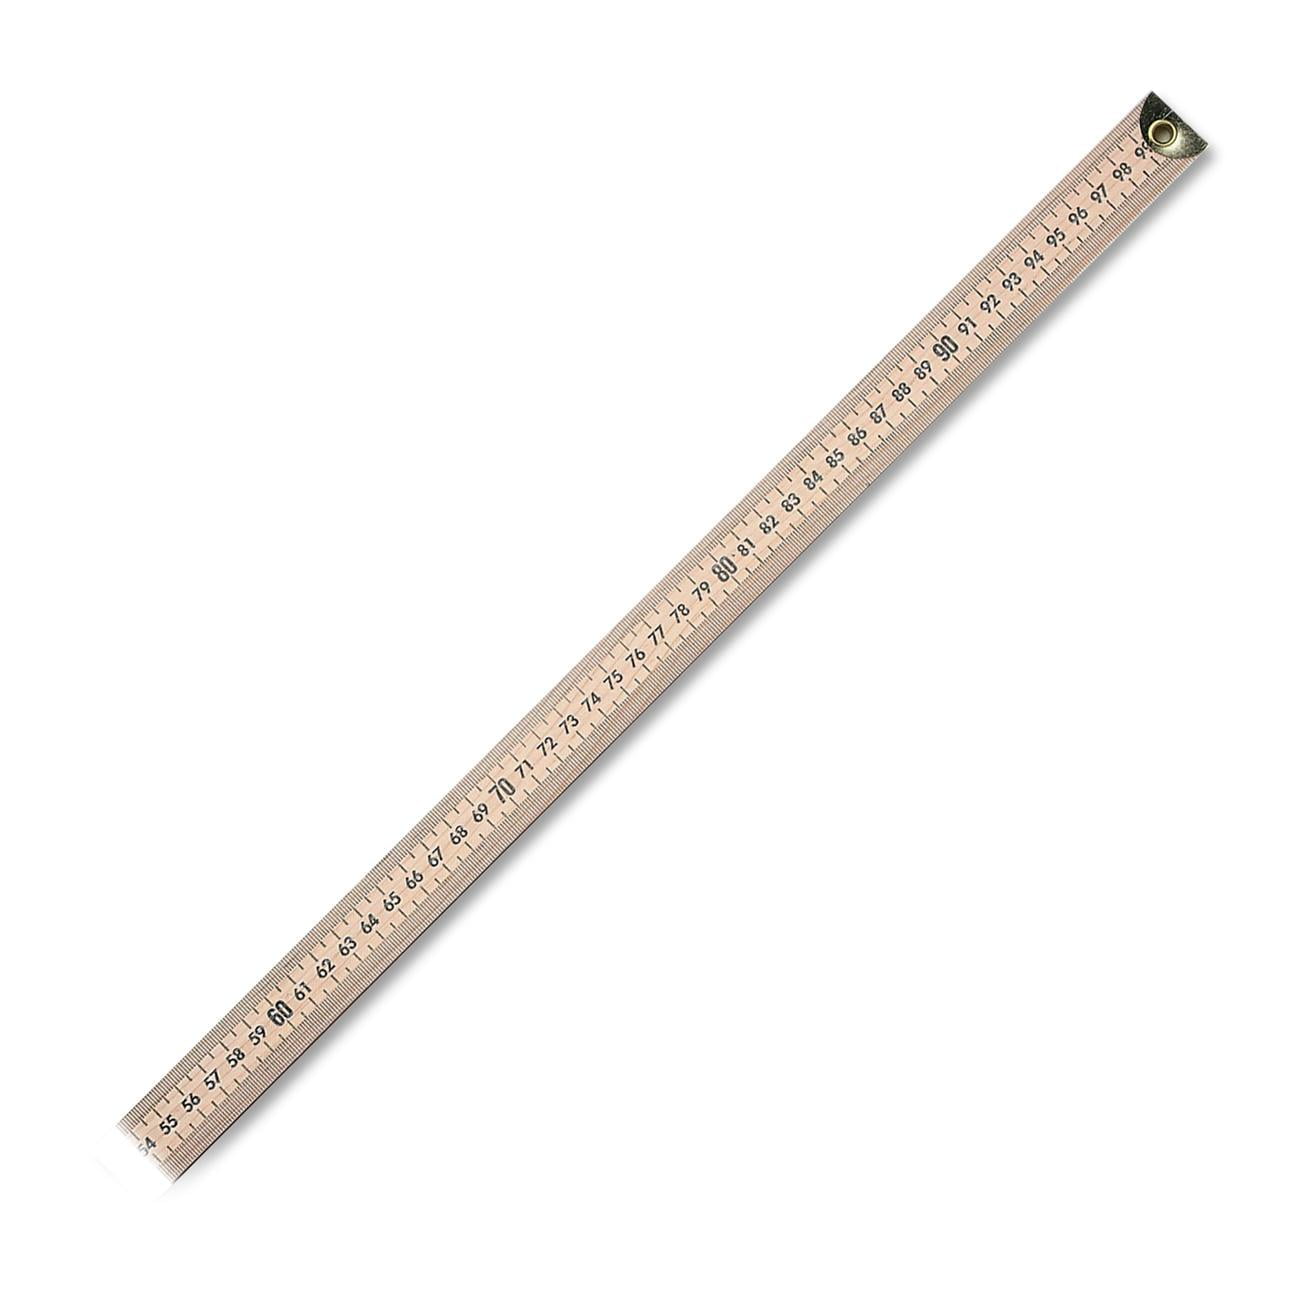 Westcott Meter Stick Ruler with Brass Ends, Clear